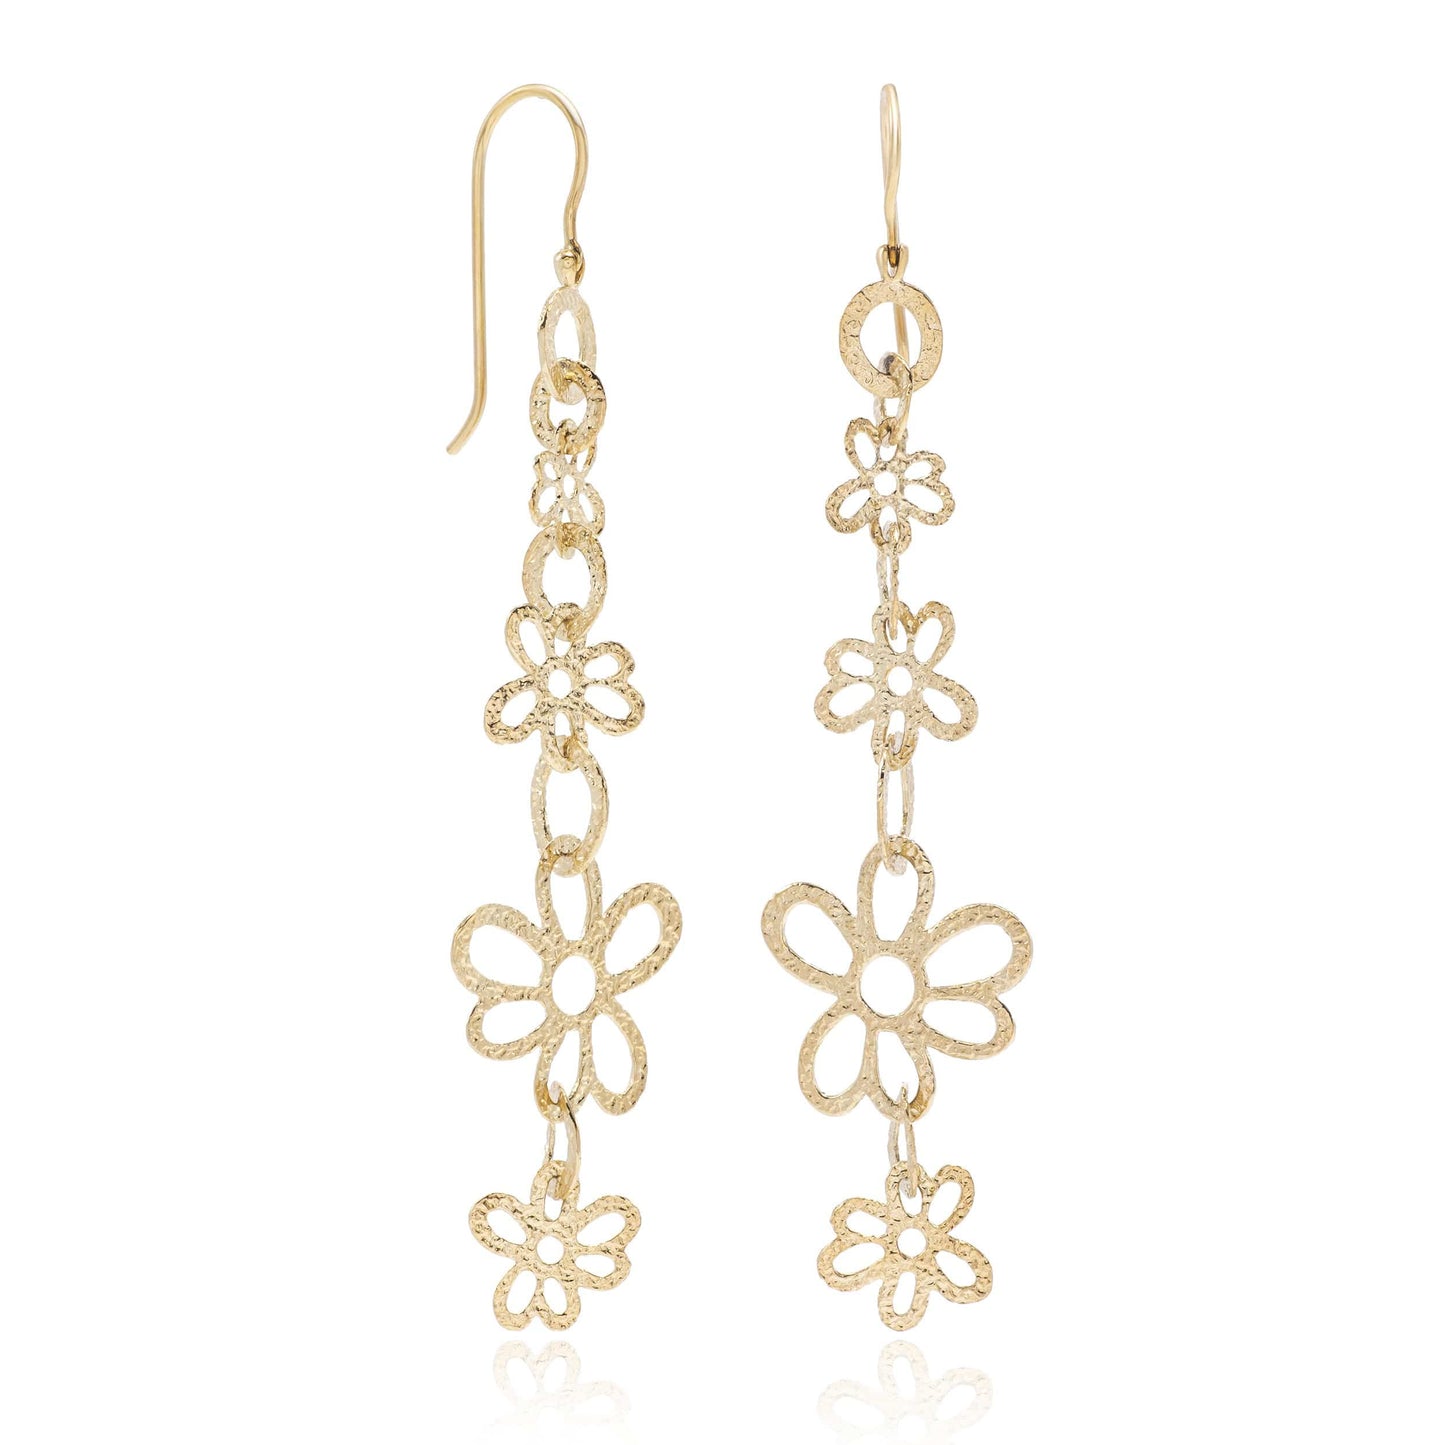 Dalia T Online Earrings Nature Collection 14KT Yellow Gold Flower Combination Long Earrings